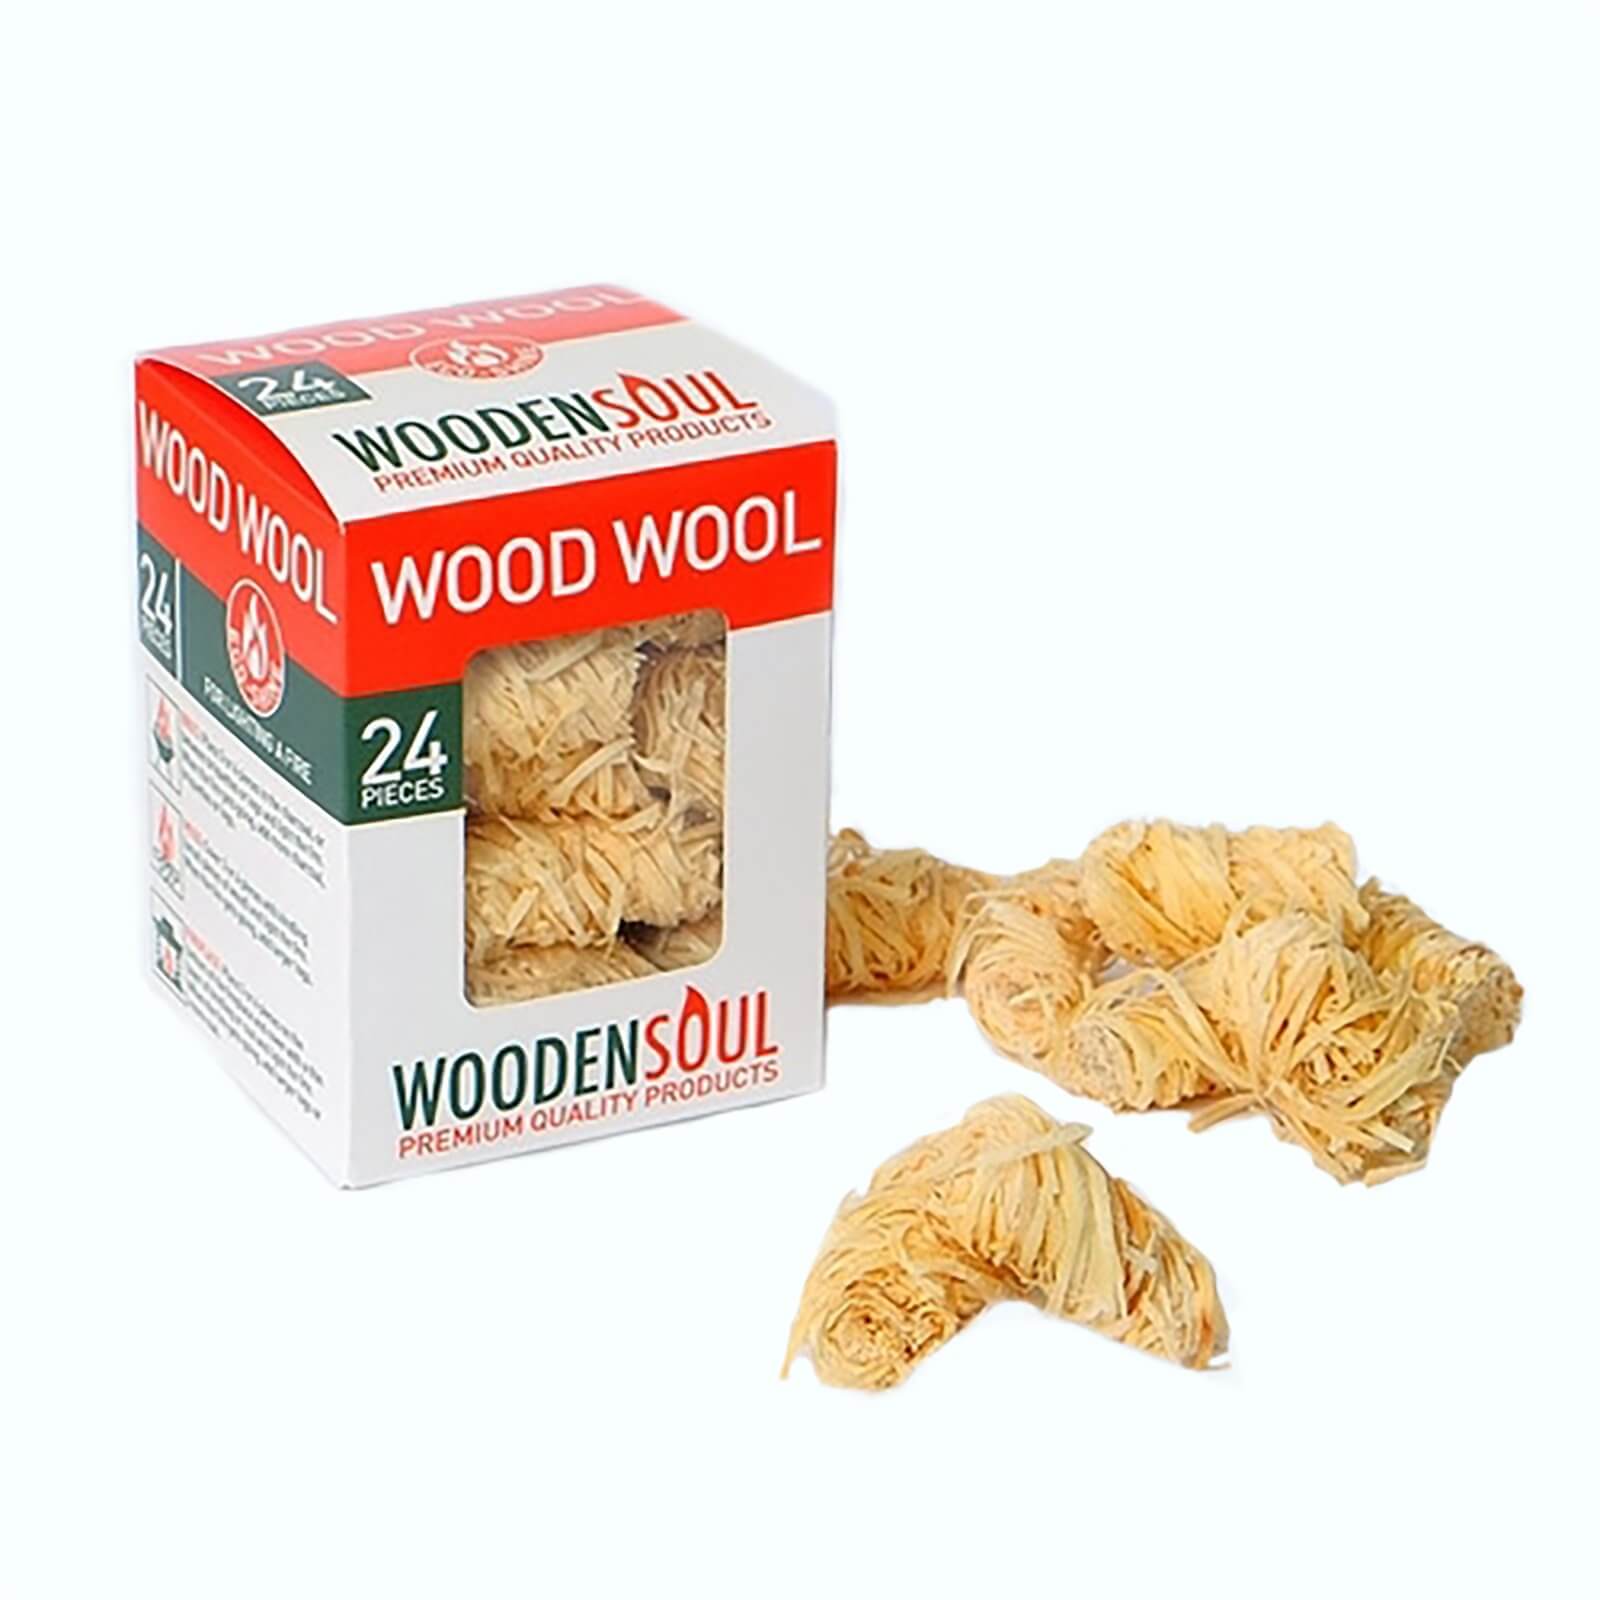 Photo of Woodensoul Wood Wool Firelighter Fuel